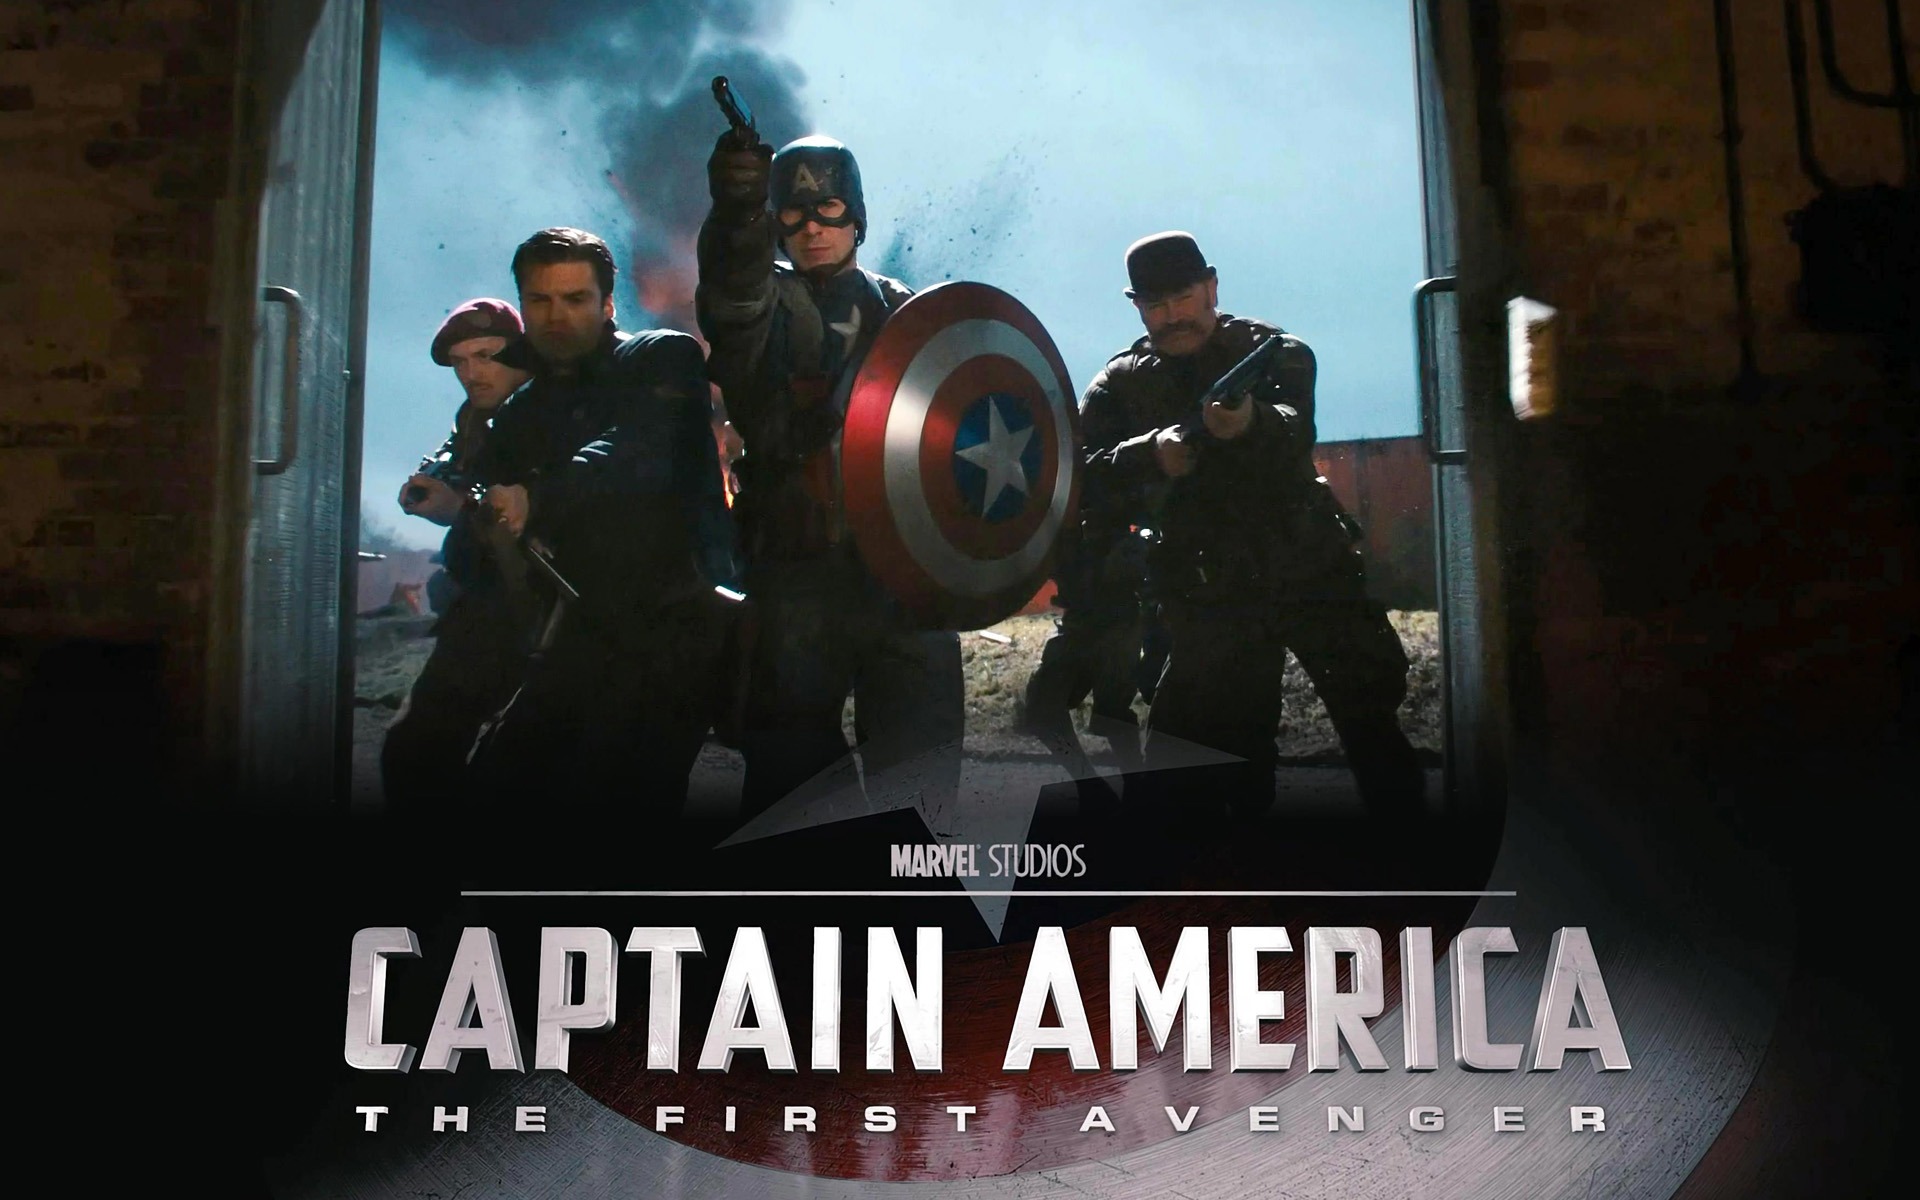 Captain America: The First Avenger wallpapers HD #9 - 1920x1200